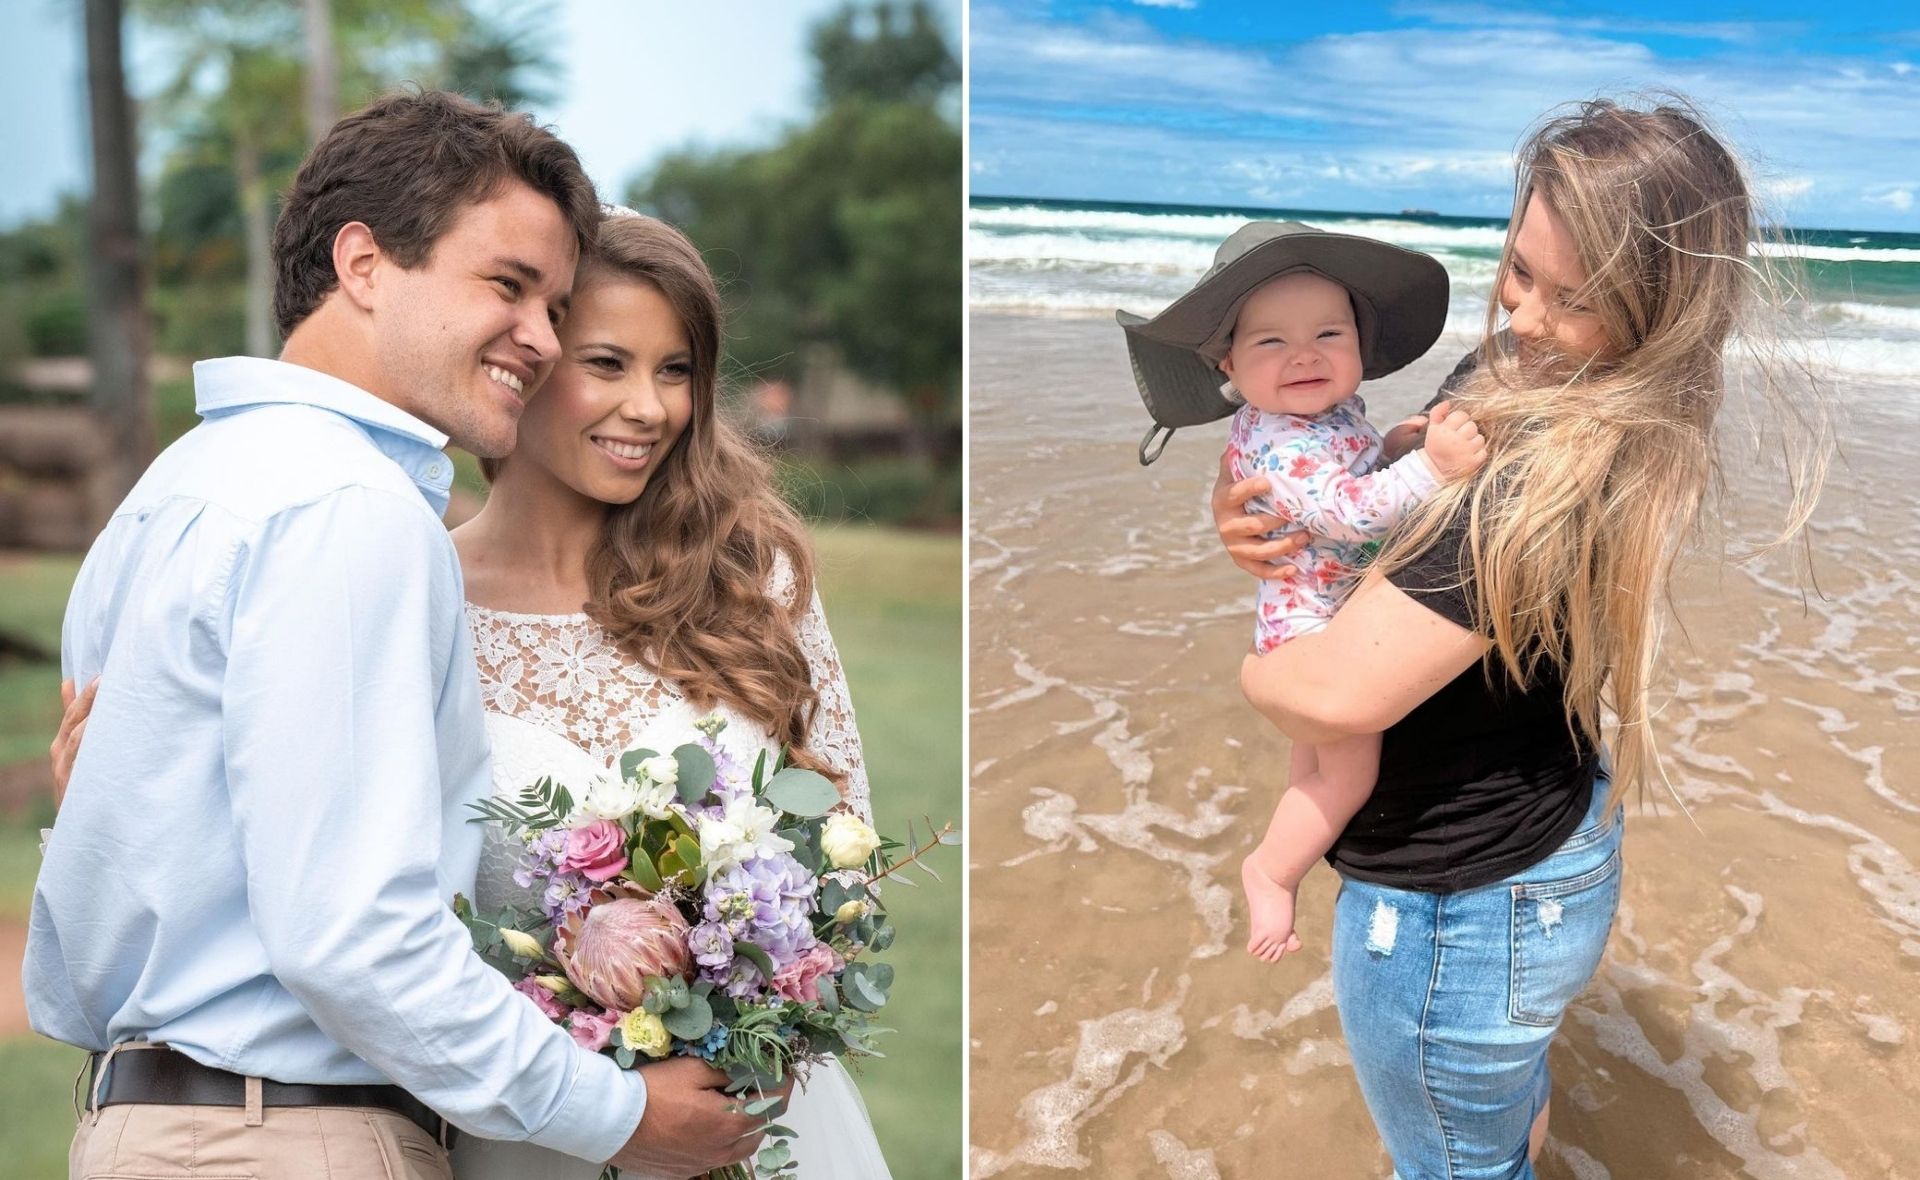 The special connection between Bindi Irwin’s wedding vows and daughter Grace Warrior will bring a tear to your eye